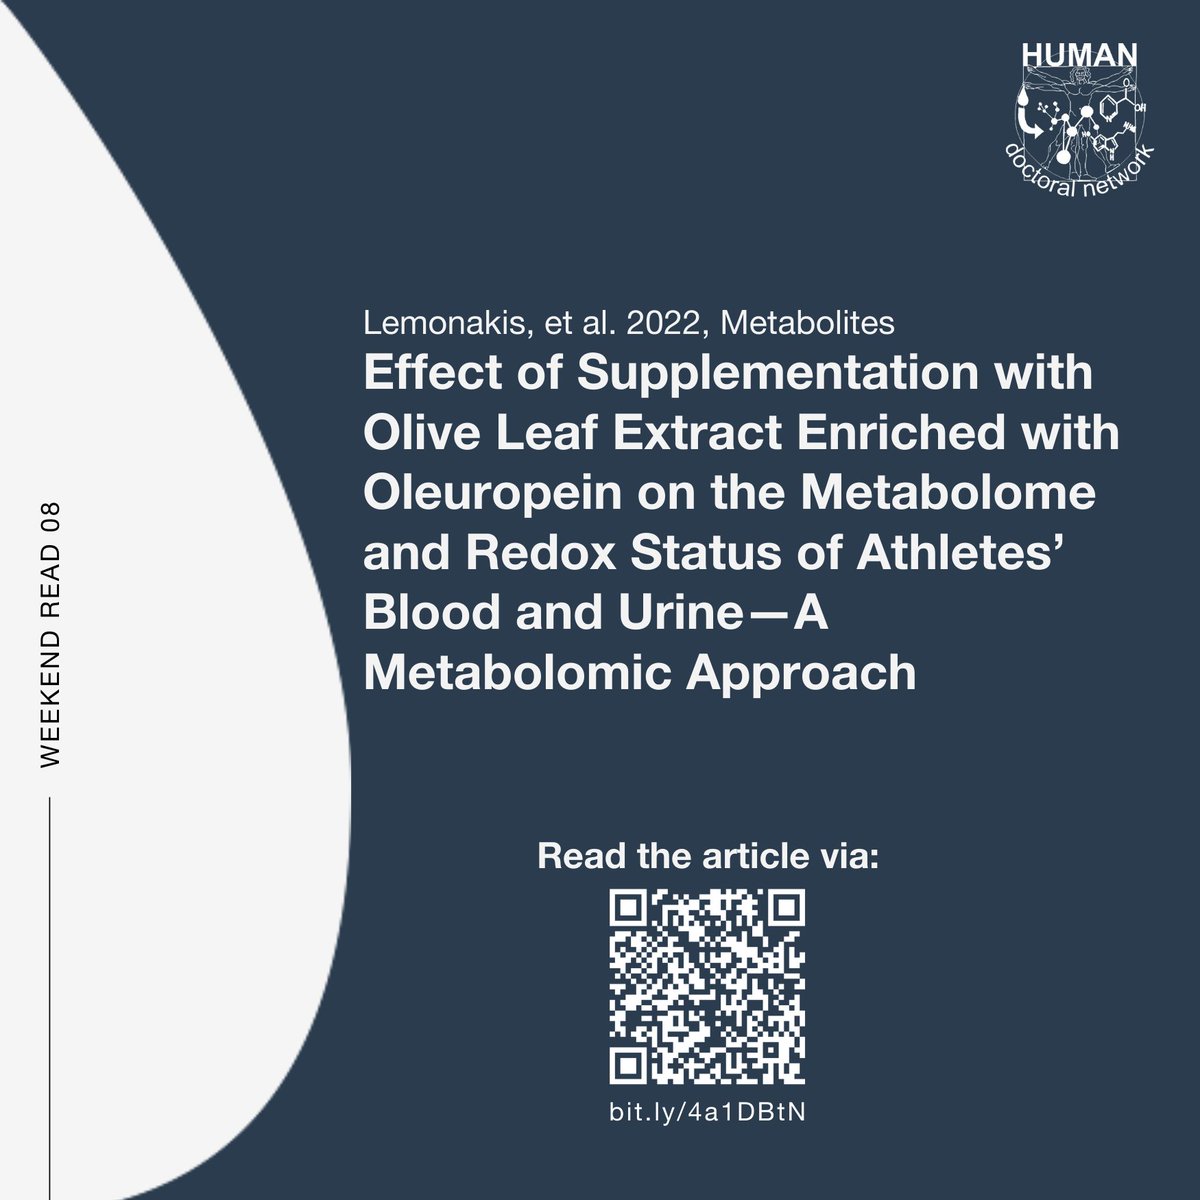 Olives 🫒 + supplements 💊 + athletes 🏊🏻‍♀️ = ❓ This #WeekendRead poses an interesting question: can supplements affect athletic performance? The short answer is yes, since supplements affect certain metabolic pathways in body. Interested? bit.ly/4a1DBtN #metabolomics